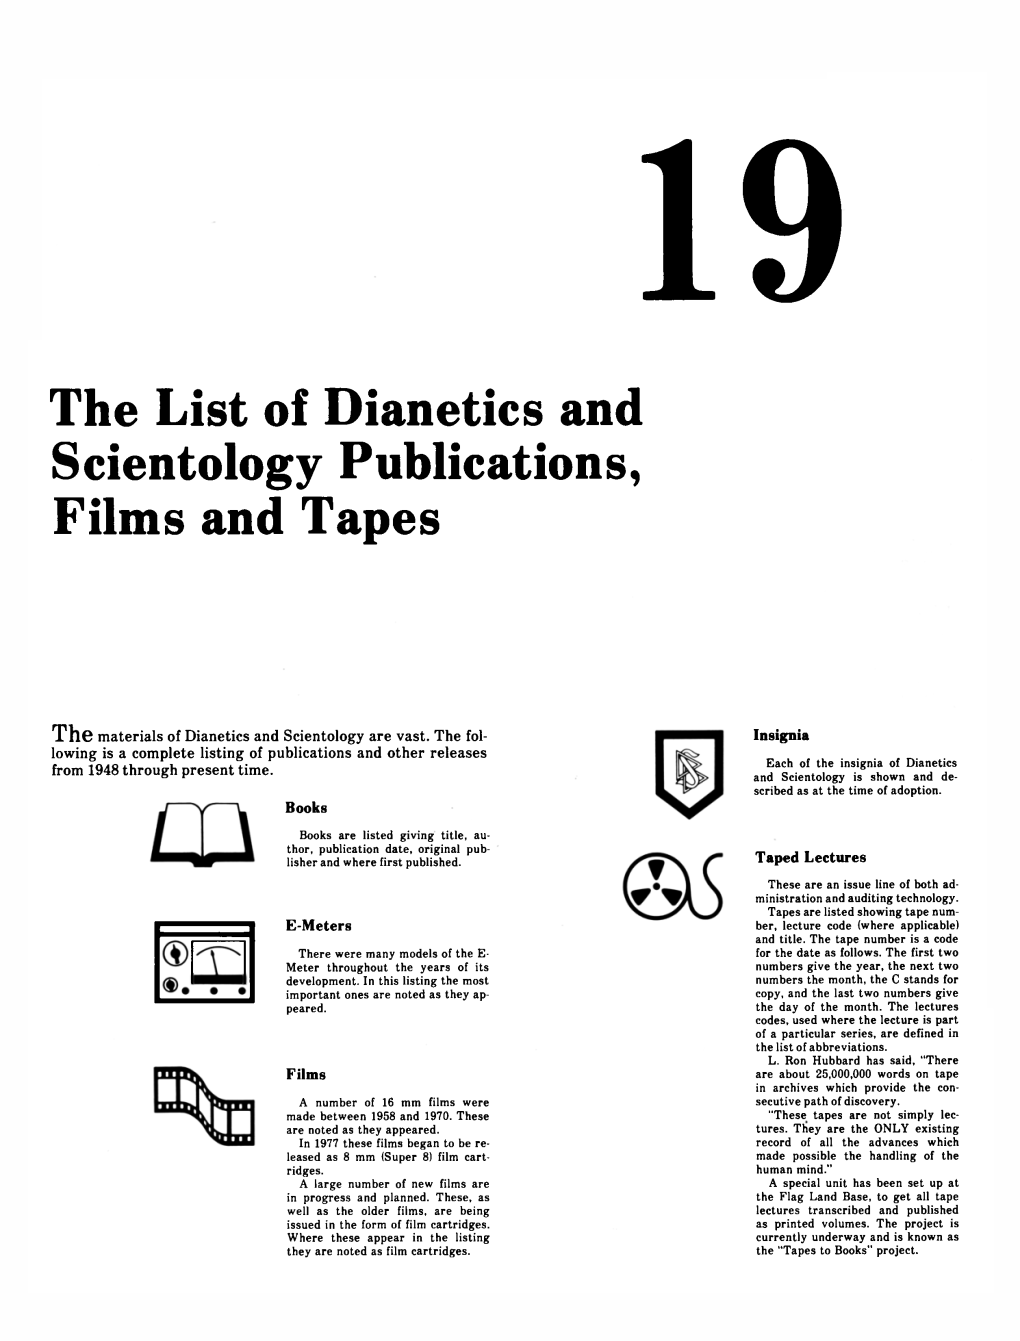 The List of Dianetics and Scientology Publications, Films and Tapes